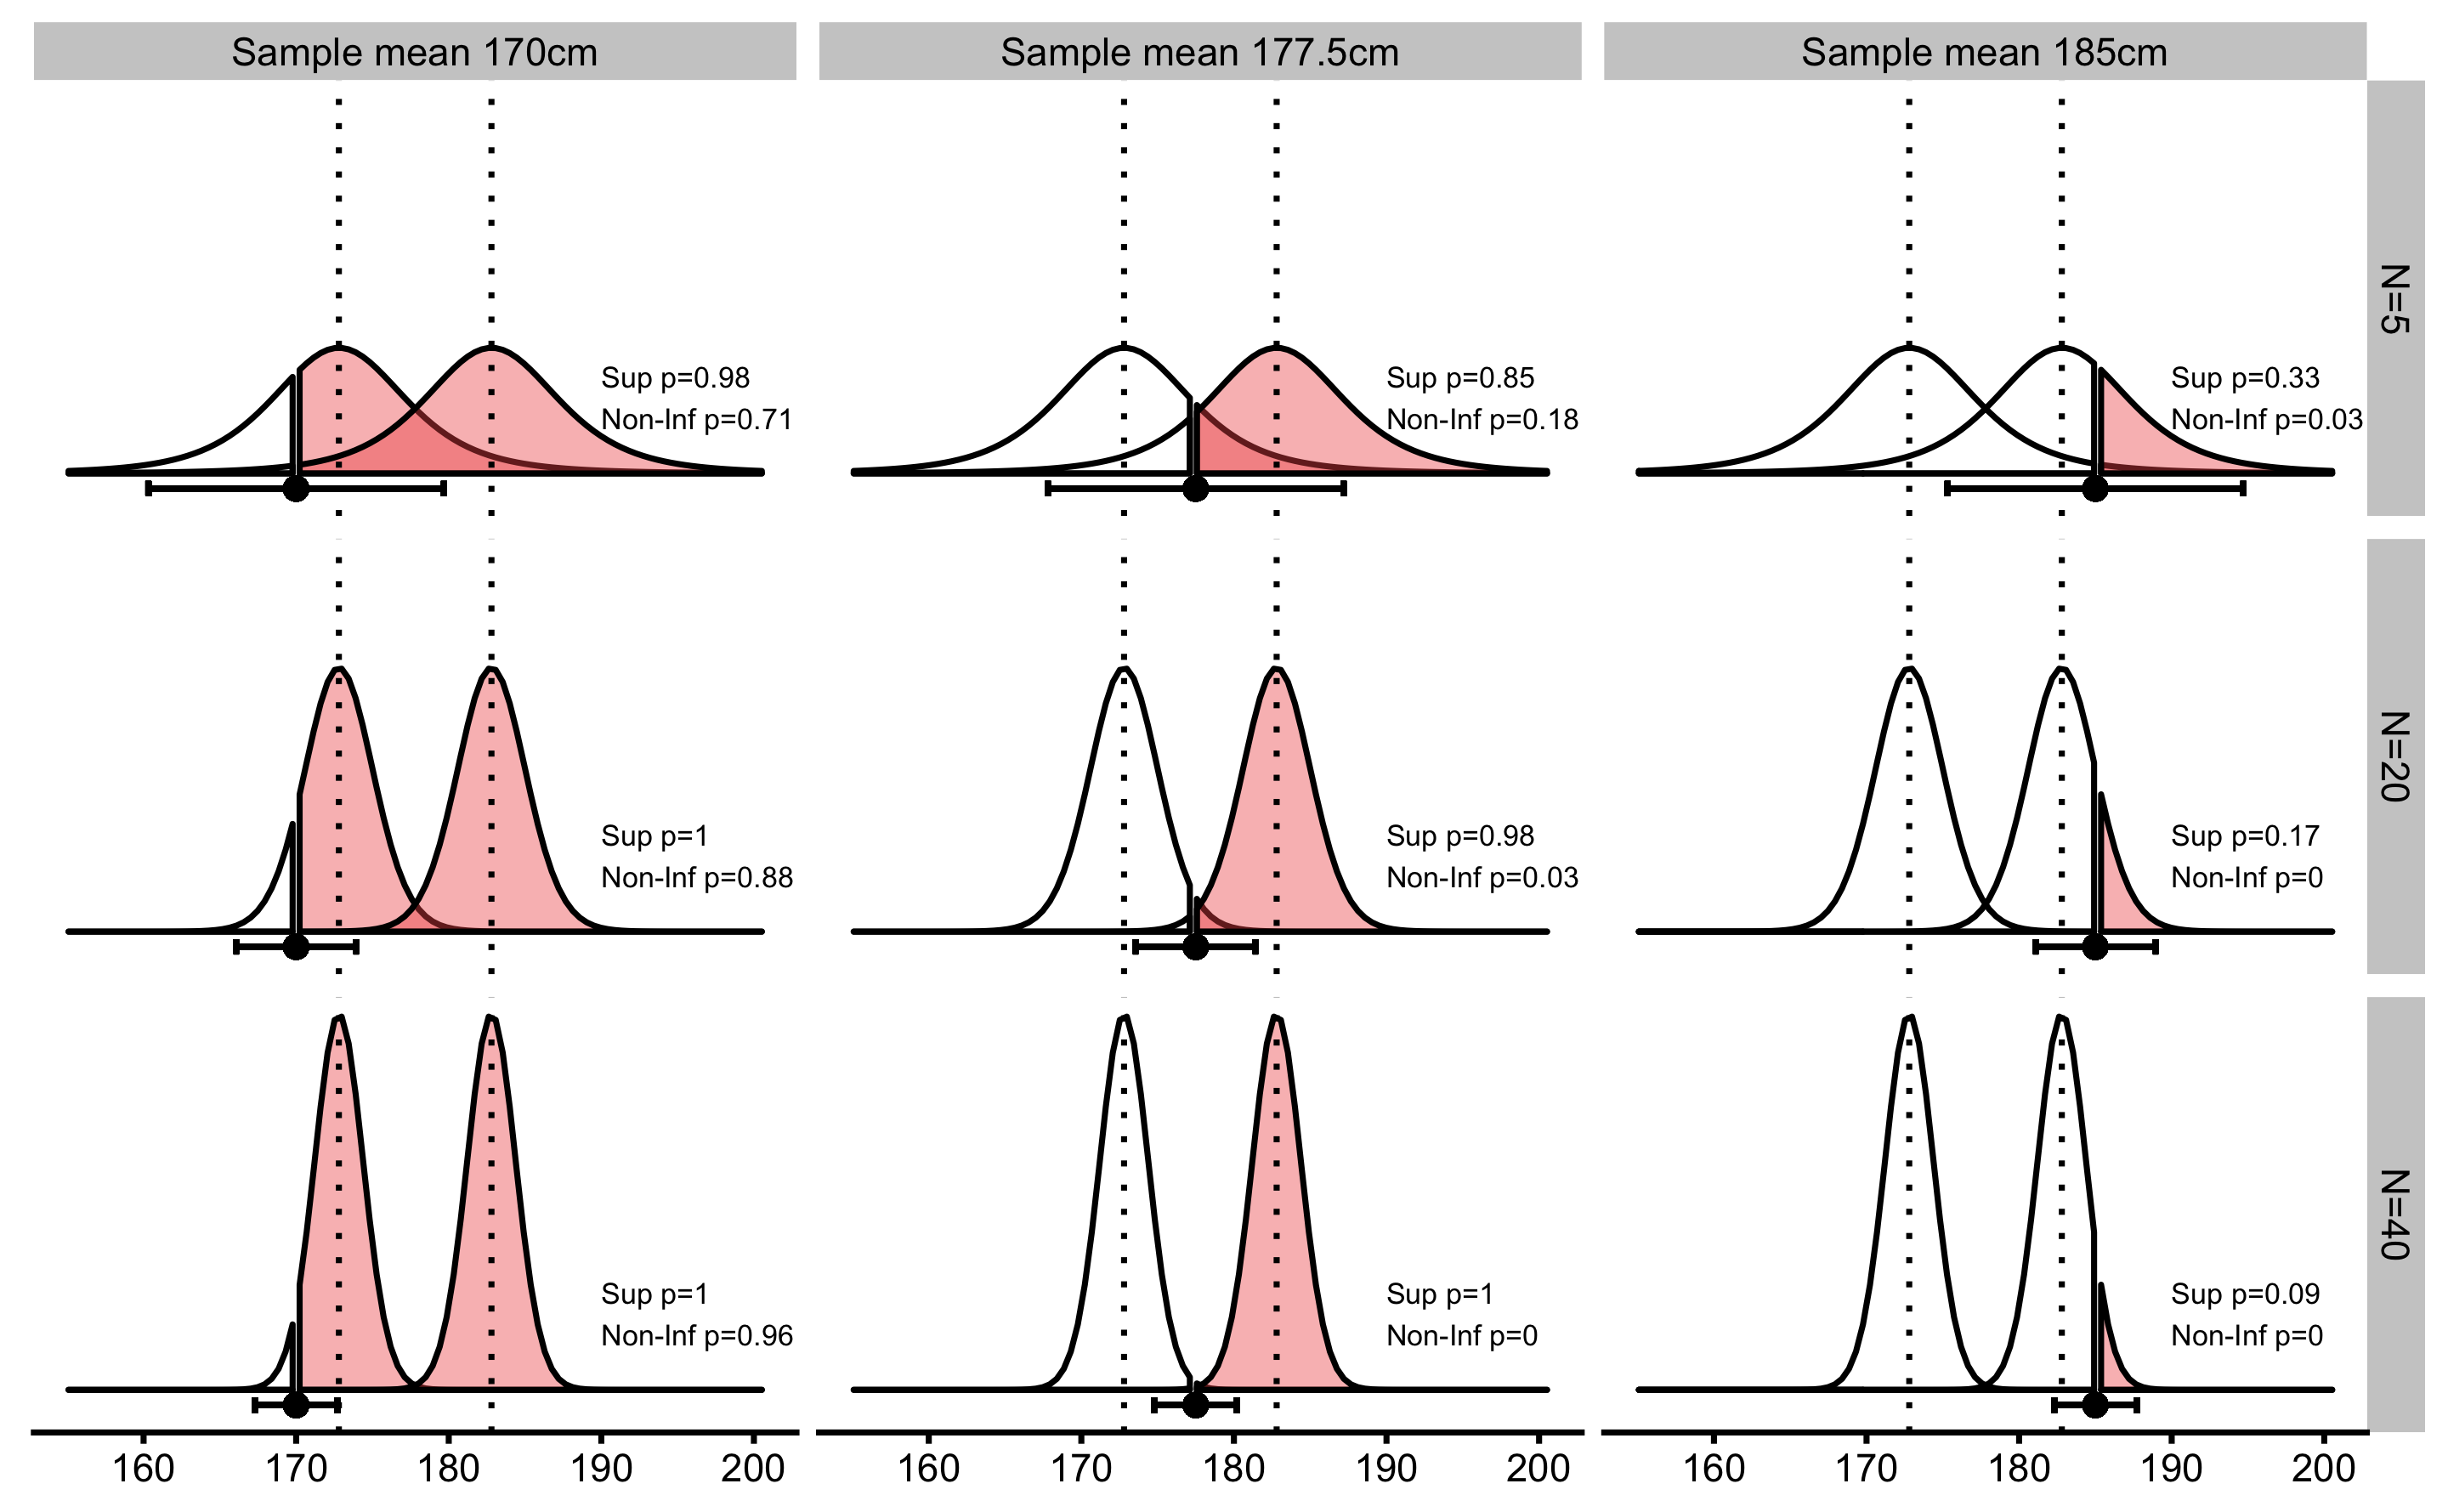 Superiority and Non-Inferiority tests. Similar to equivalence test using TOST procedure, superiority and non-inferiority tests involve two one-sided NHSTs at SESOI thresholds in the positive direction. Error bars represent 90% confidence intervals.